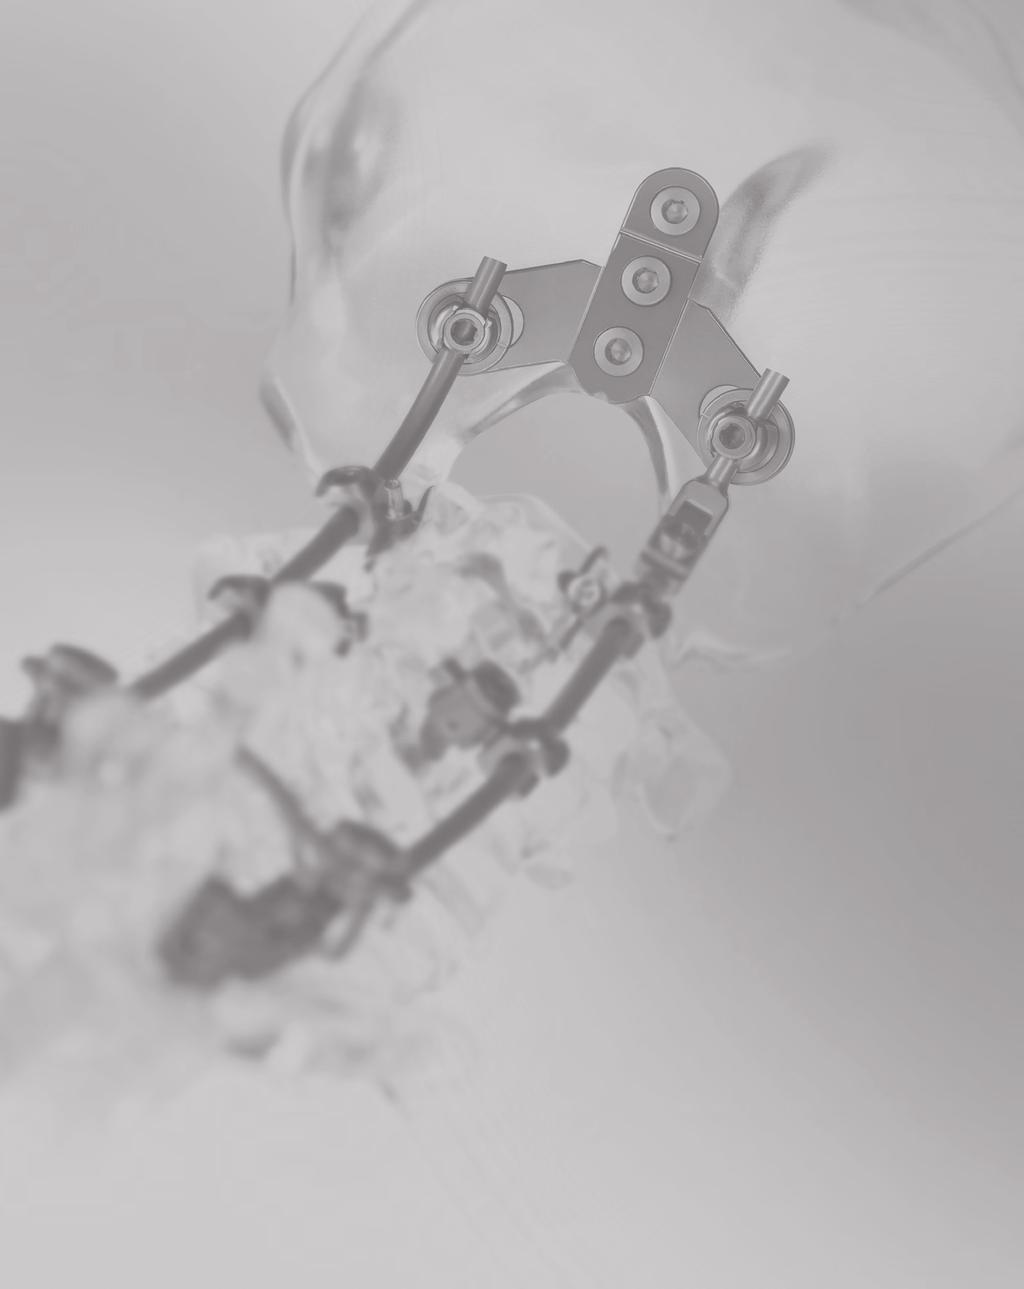 DePuy Spine has collaborated with the surgeon community to drive procedural enhancements through implant and instrument UNPARALLELED FIXATION OPTIONS innovation.